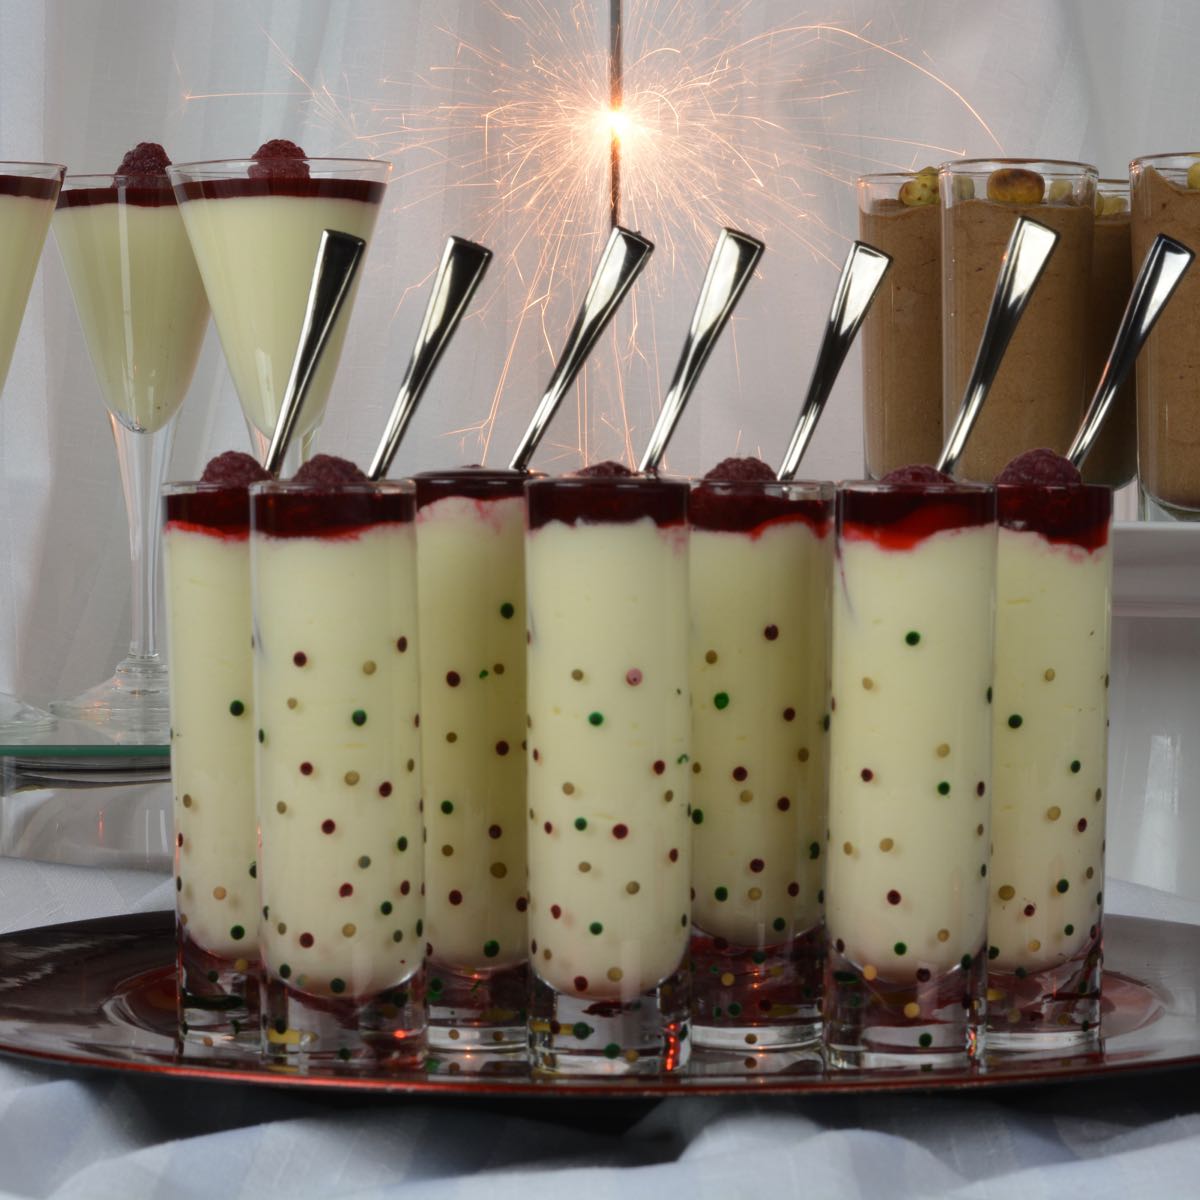 A tray of White Chocolate Mousse shots with raspberry sauce and a raspberry on top.